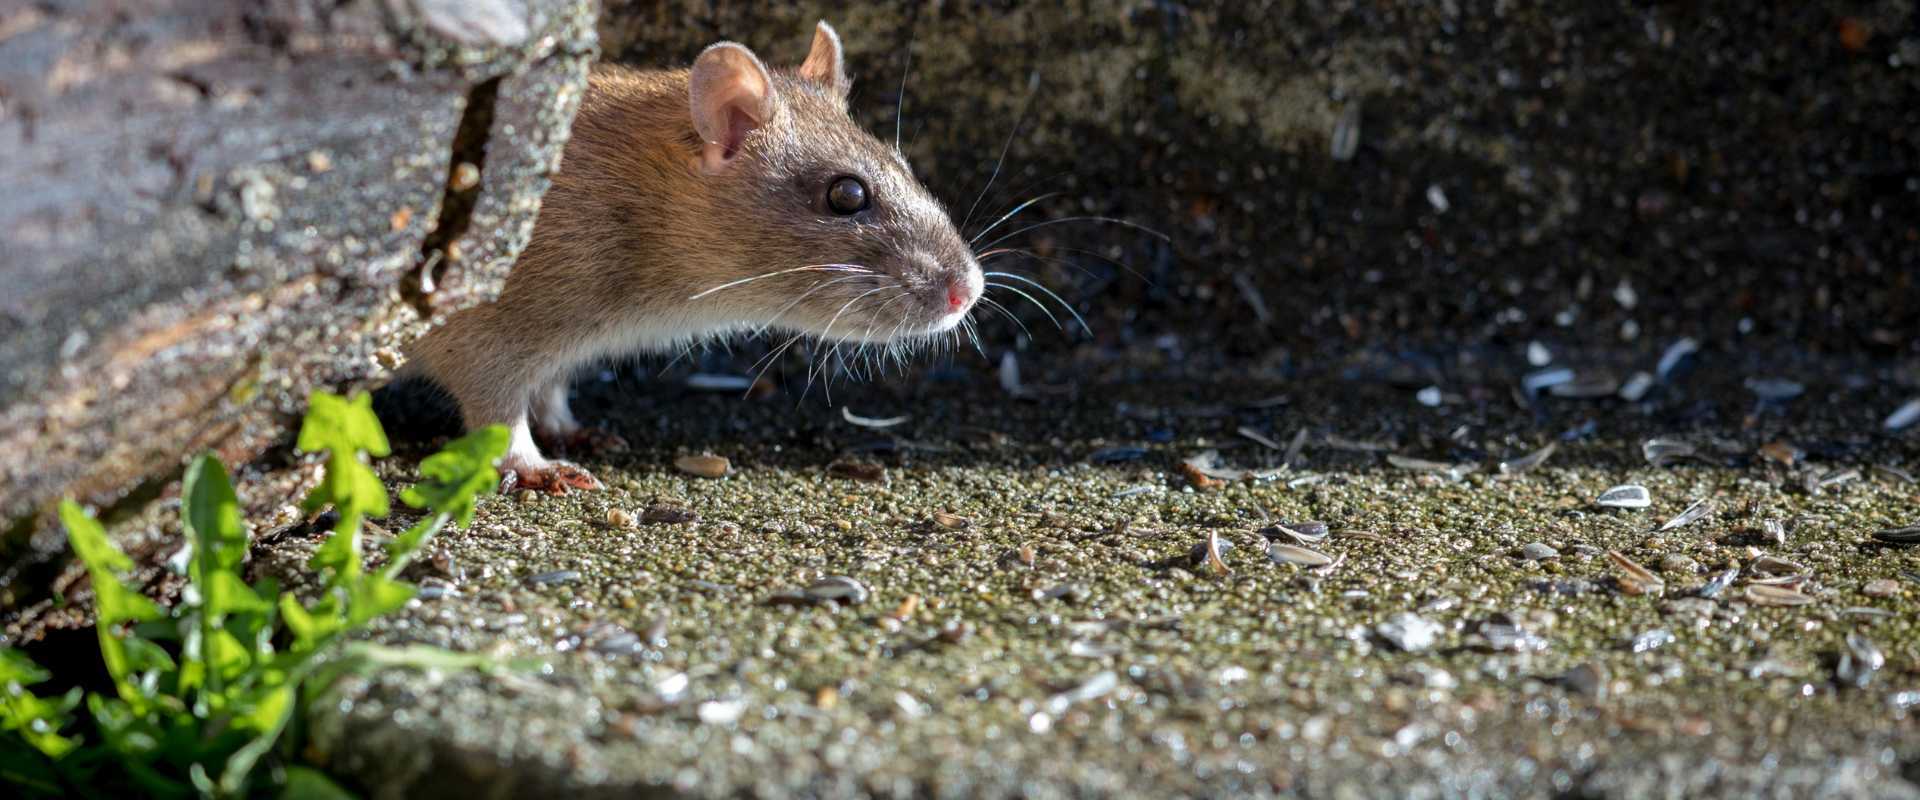 baltimore md rodent control